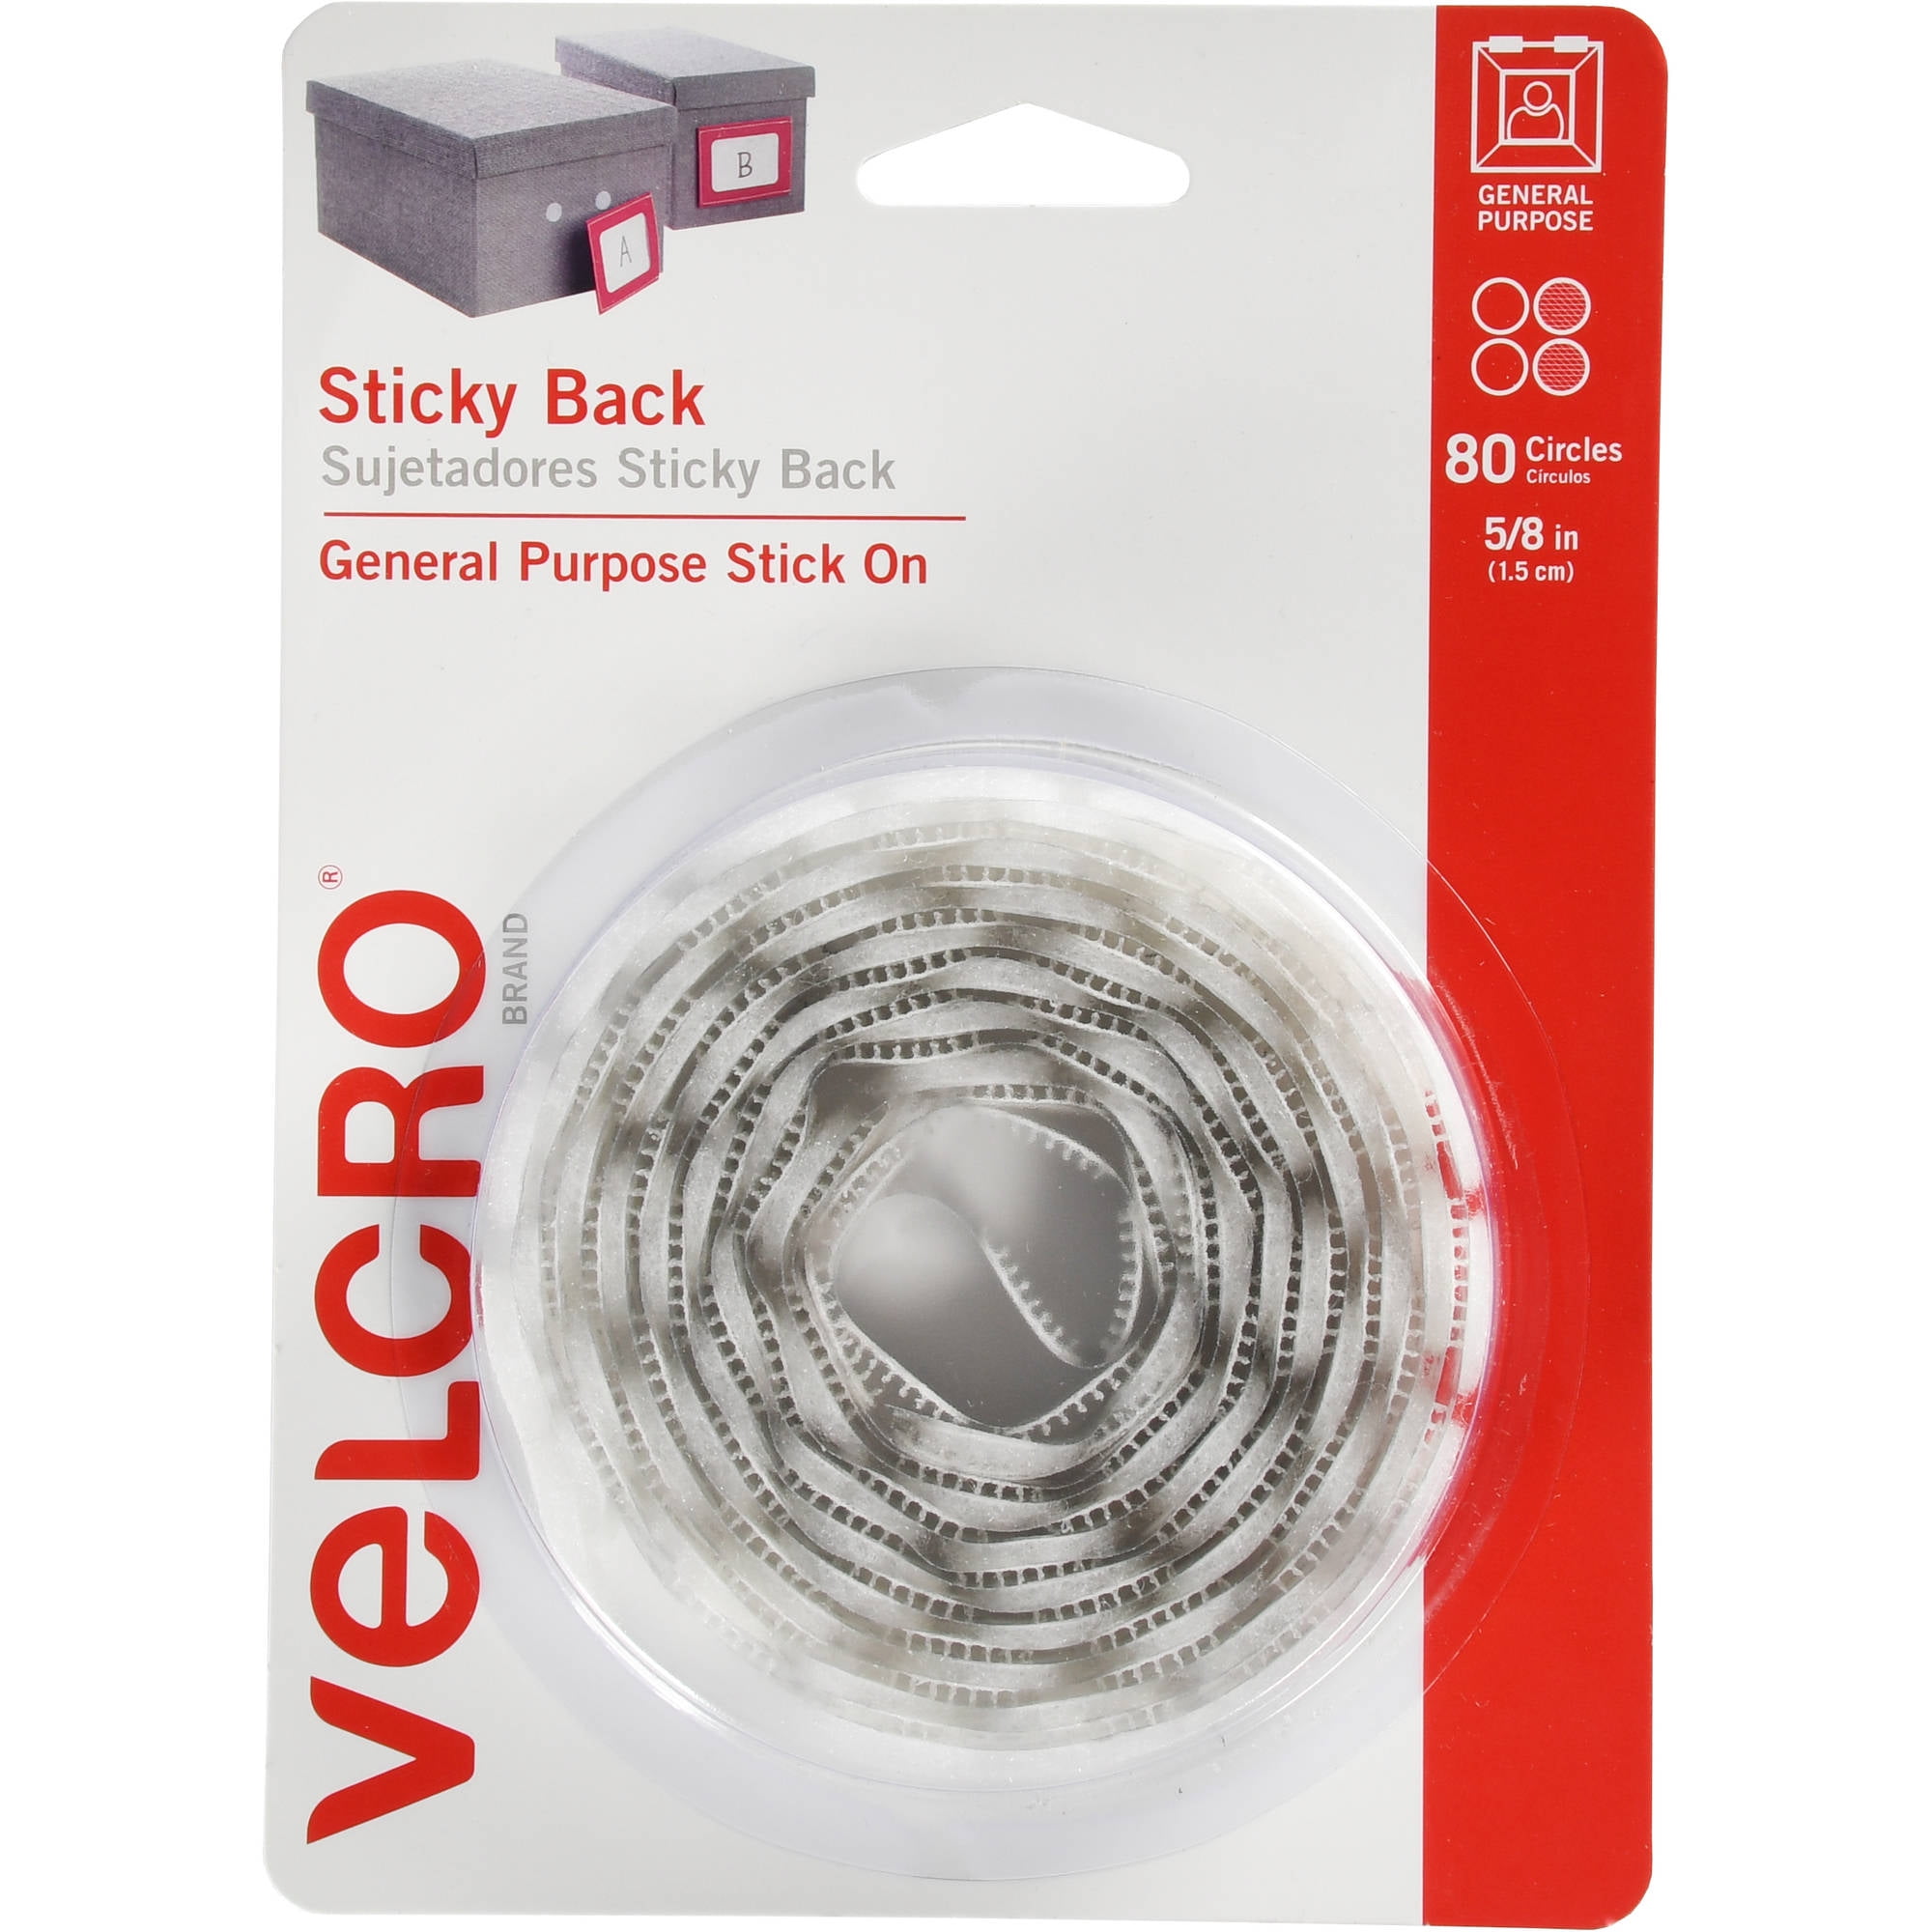 3 New Velcro Hook and Loop Fastener 7/8" x 7/8" White 12 pk Sticky Back 90073 